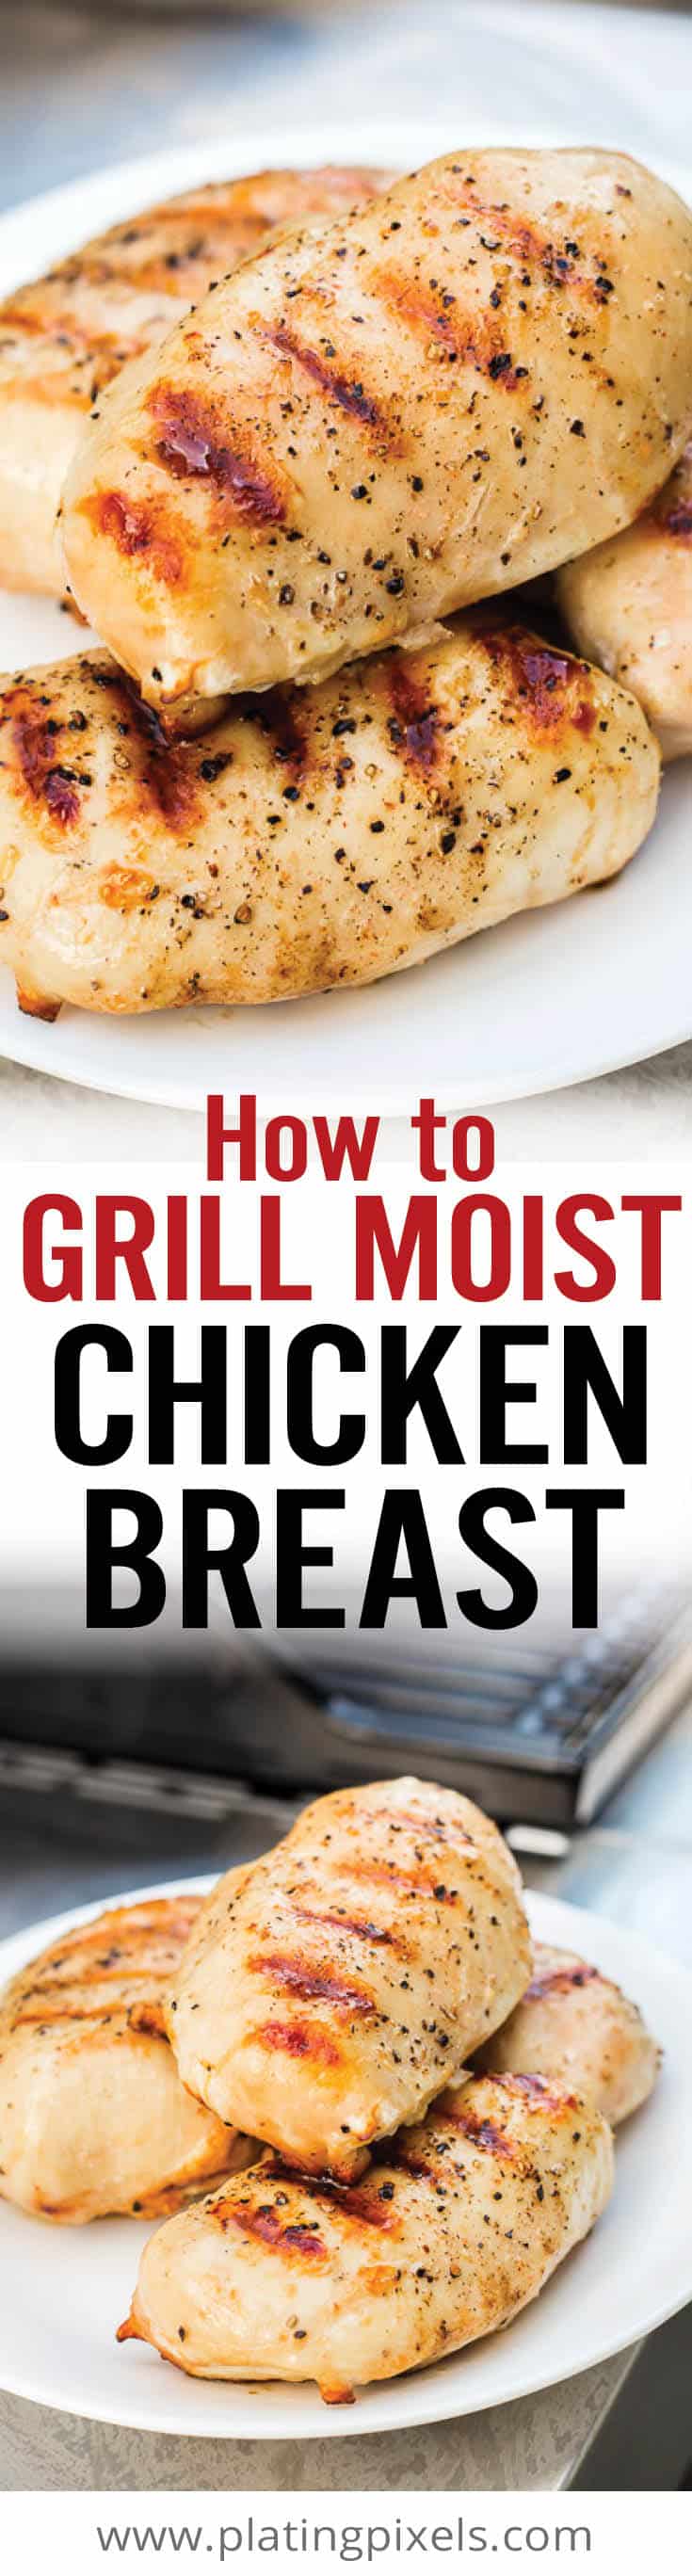 How to Grill Chicken Breast (Juicy and Tender)